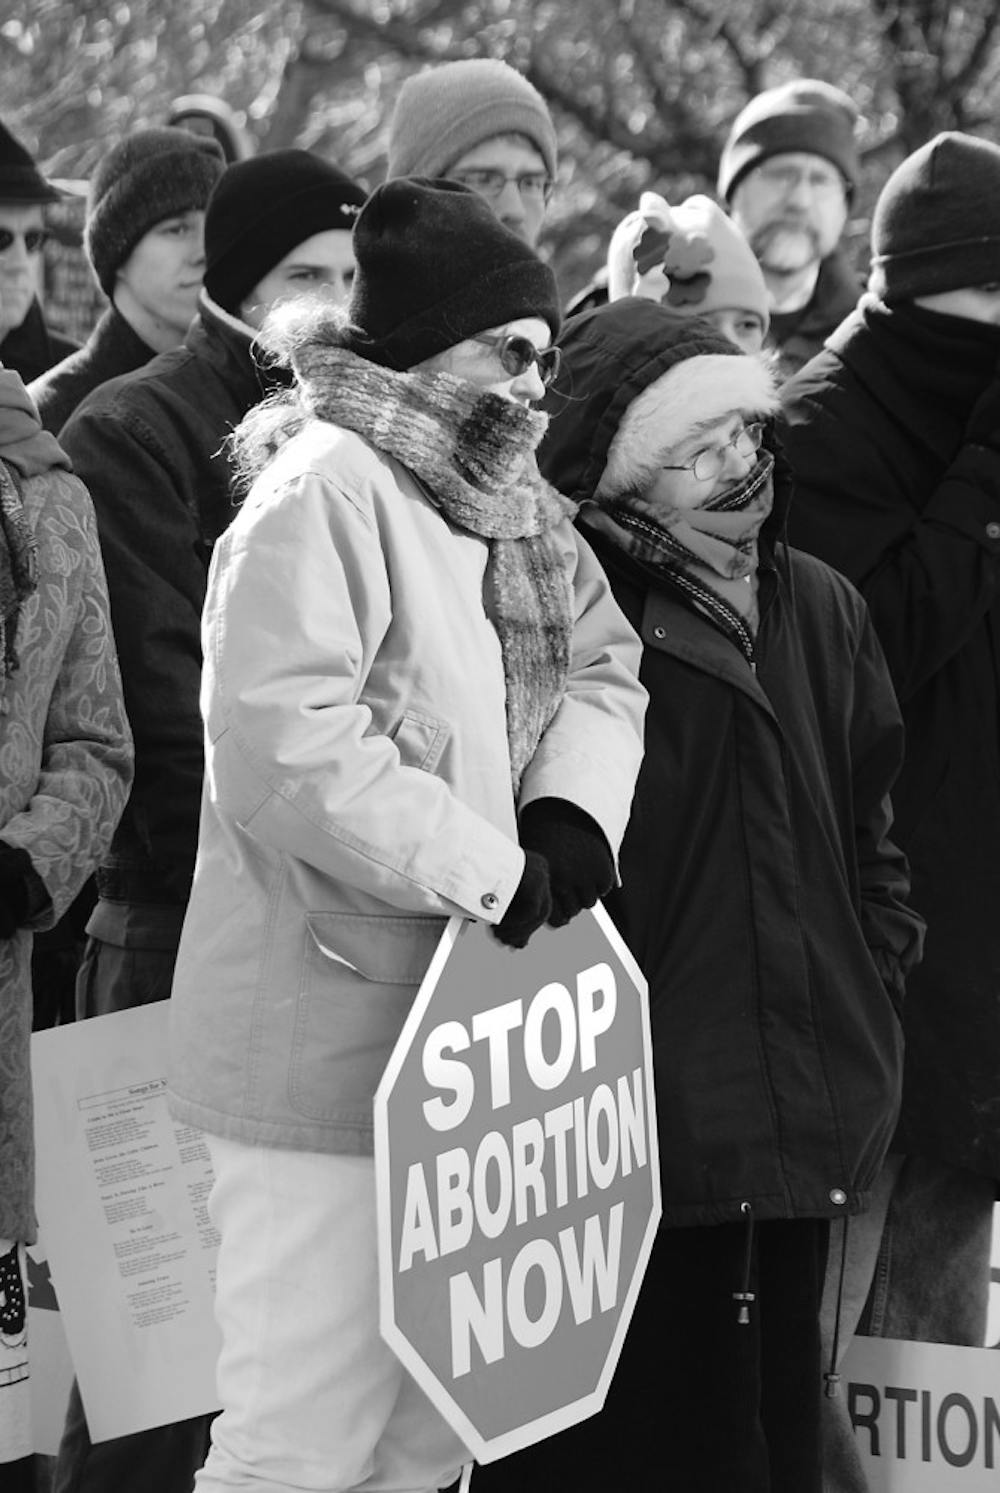 Pro-life protesters rally Sunday afternoon on the lawn of the Monroe County Courthouse to speak against abortion. The protest day was chosen specifically because it was the 35th anniversary of Roe v. Wade.